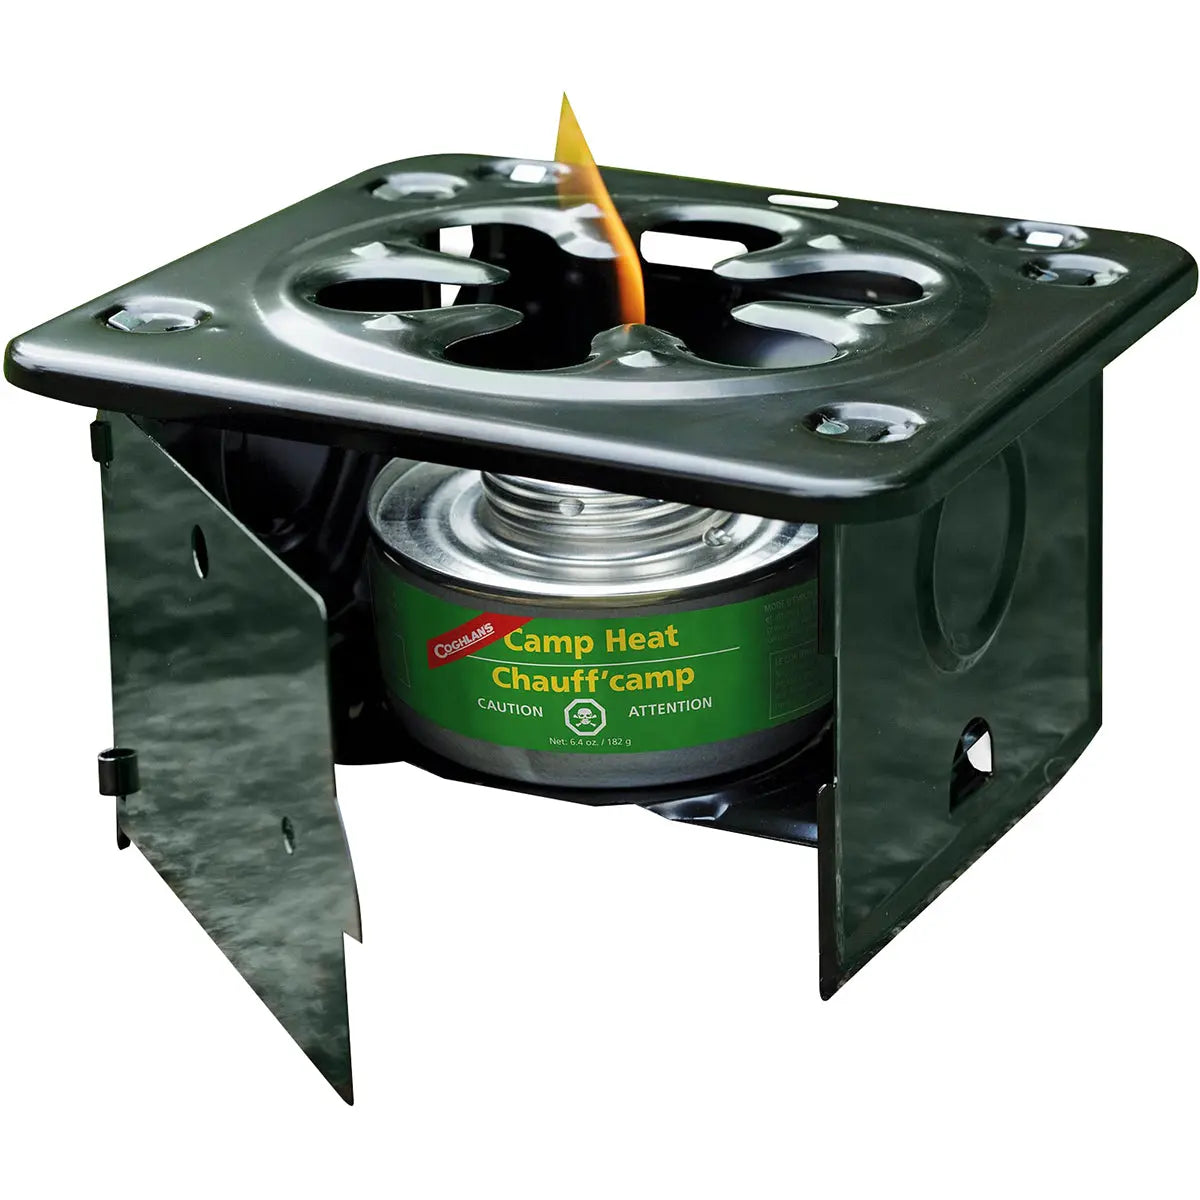 Coghlan's Folding Stove, Burns Camp Heat, Canned Fuel, or Solidified Alcohol Coghlan's